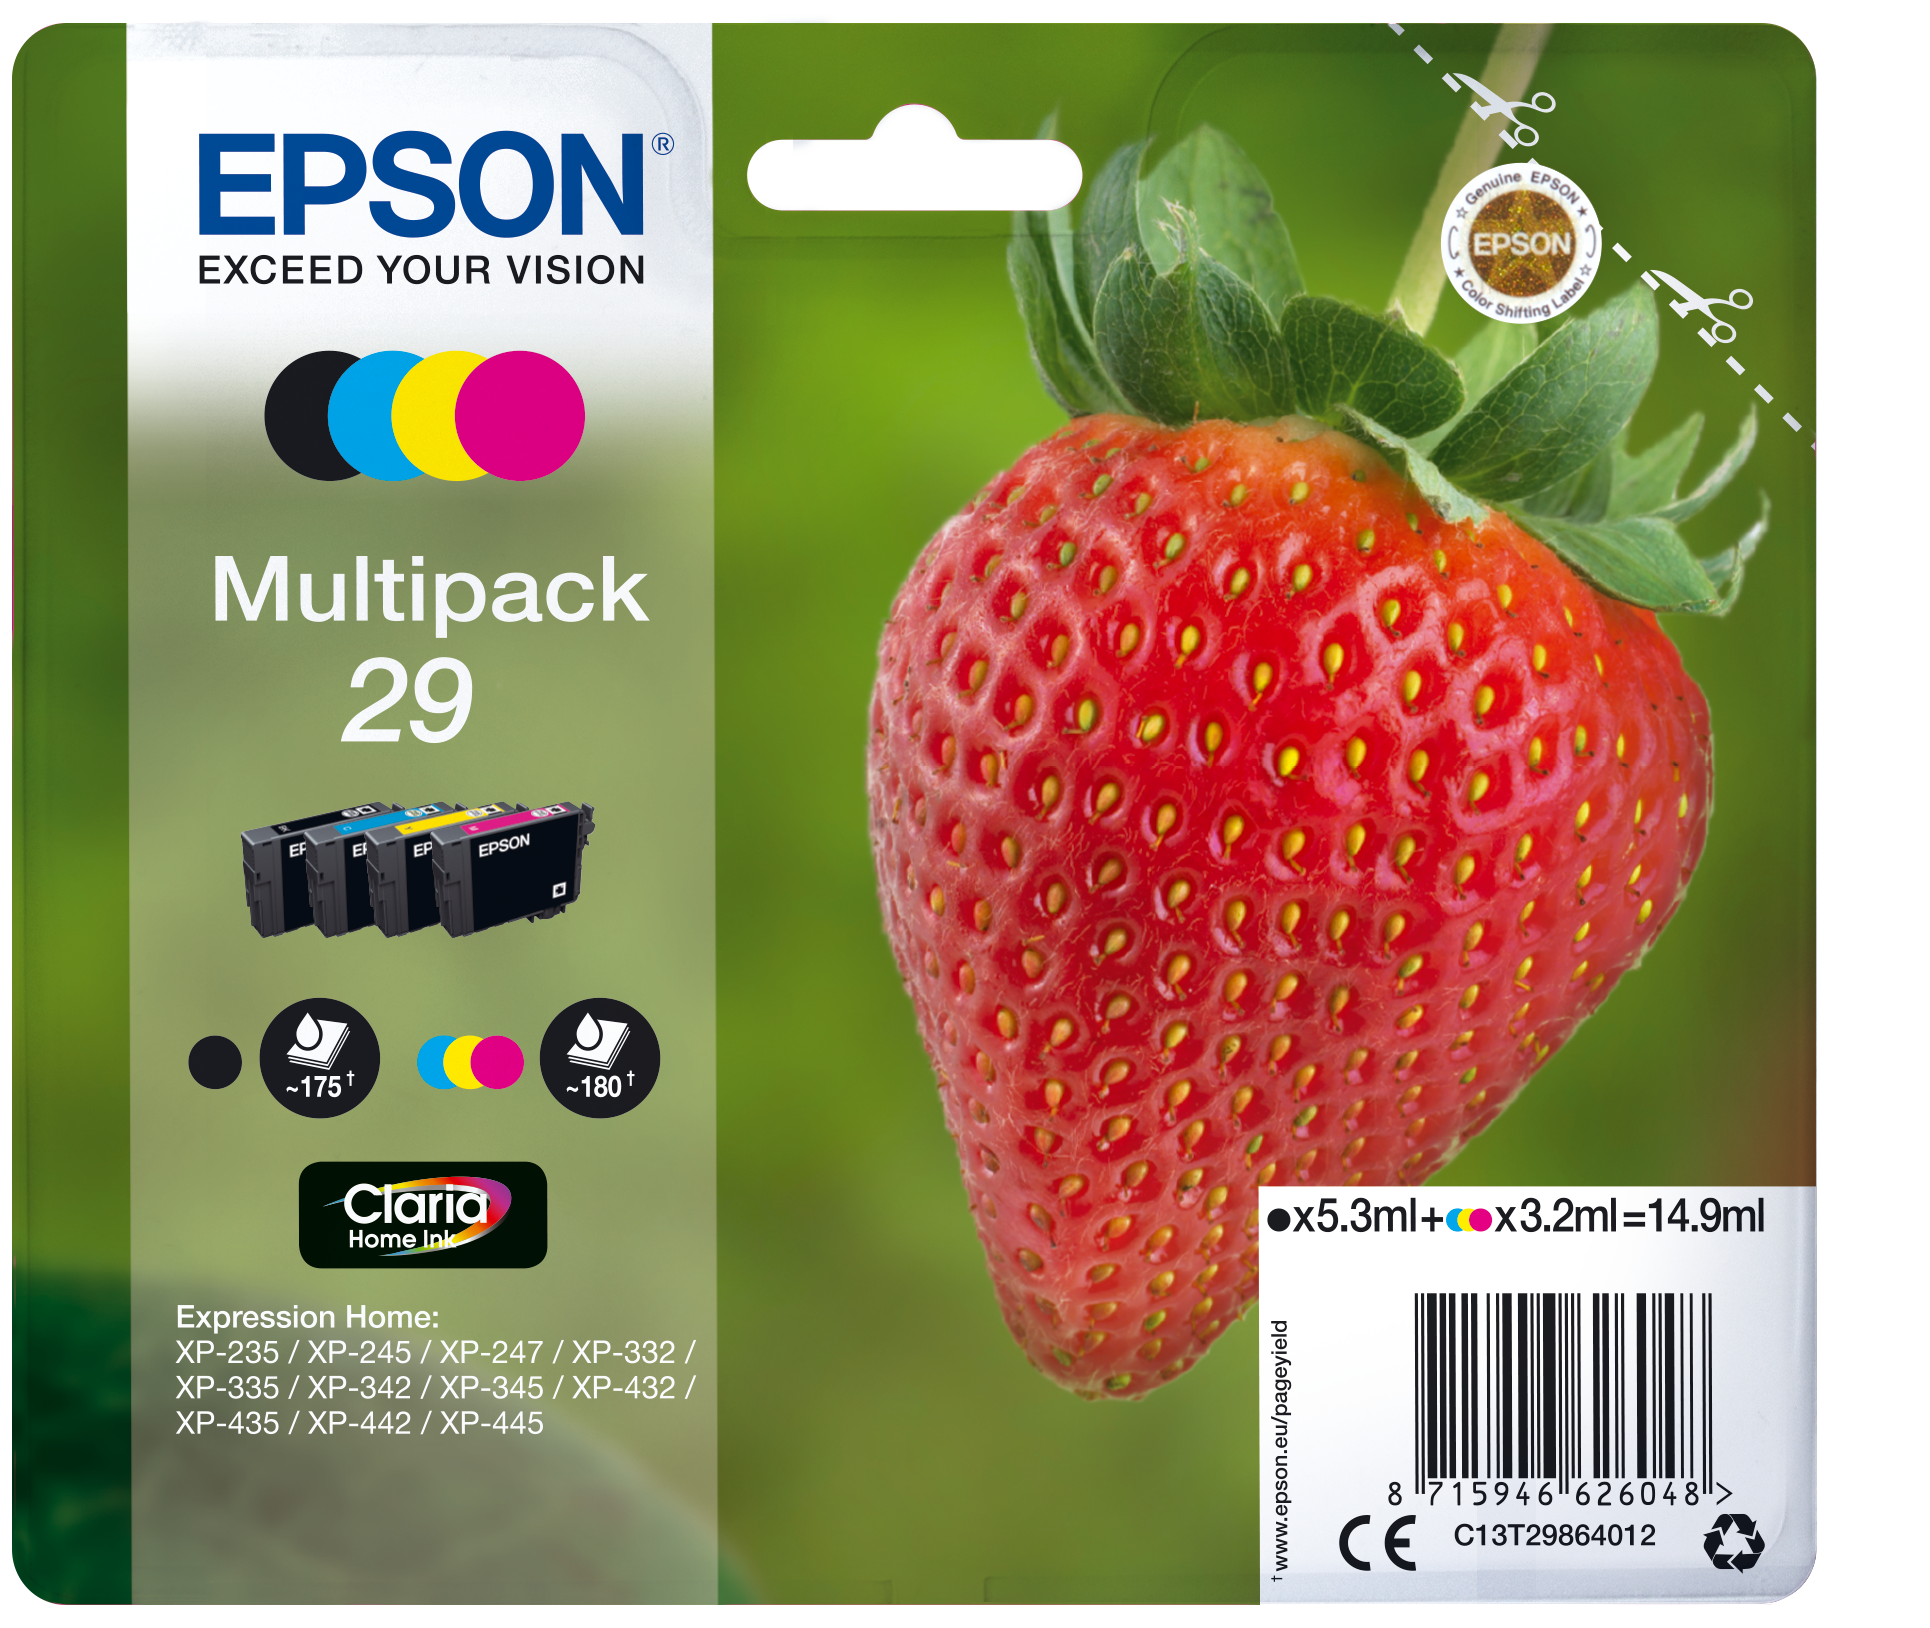 Epson Strawberry Multipack 4-colours 29 Claria Home Ink single pack / cyaan, geel, magenta, zwart